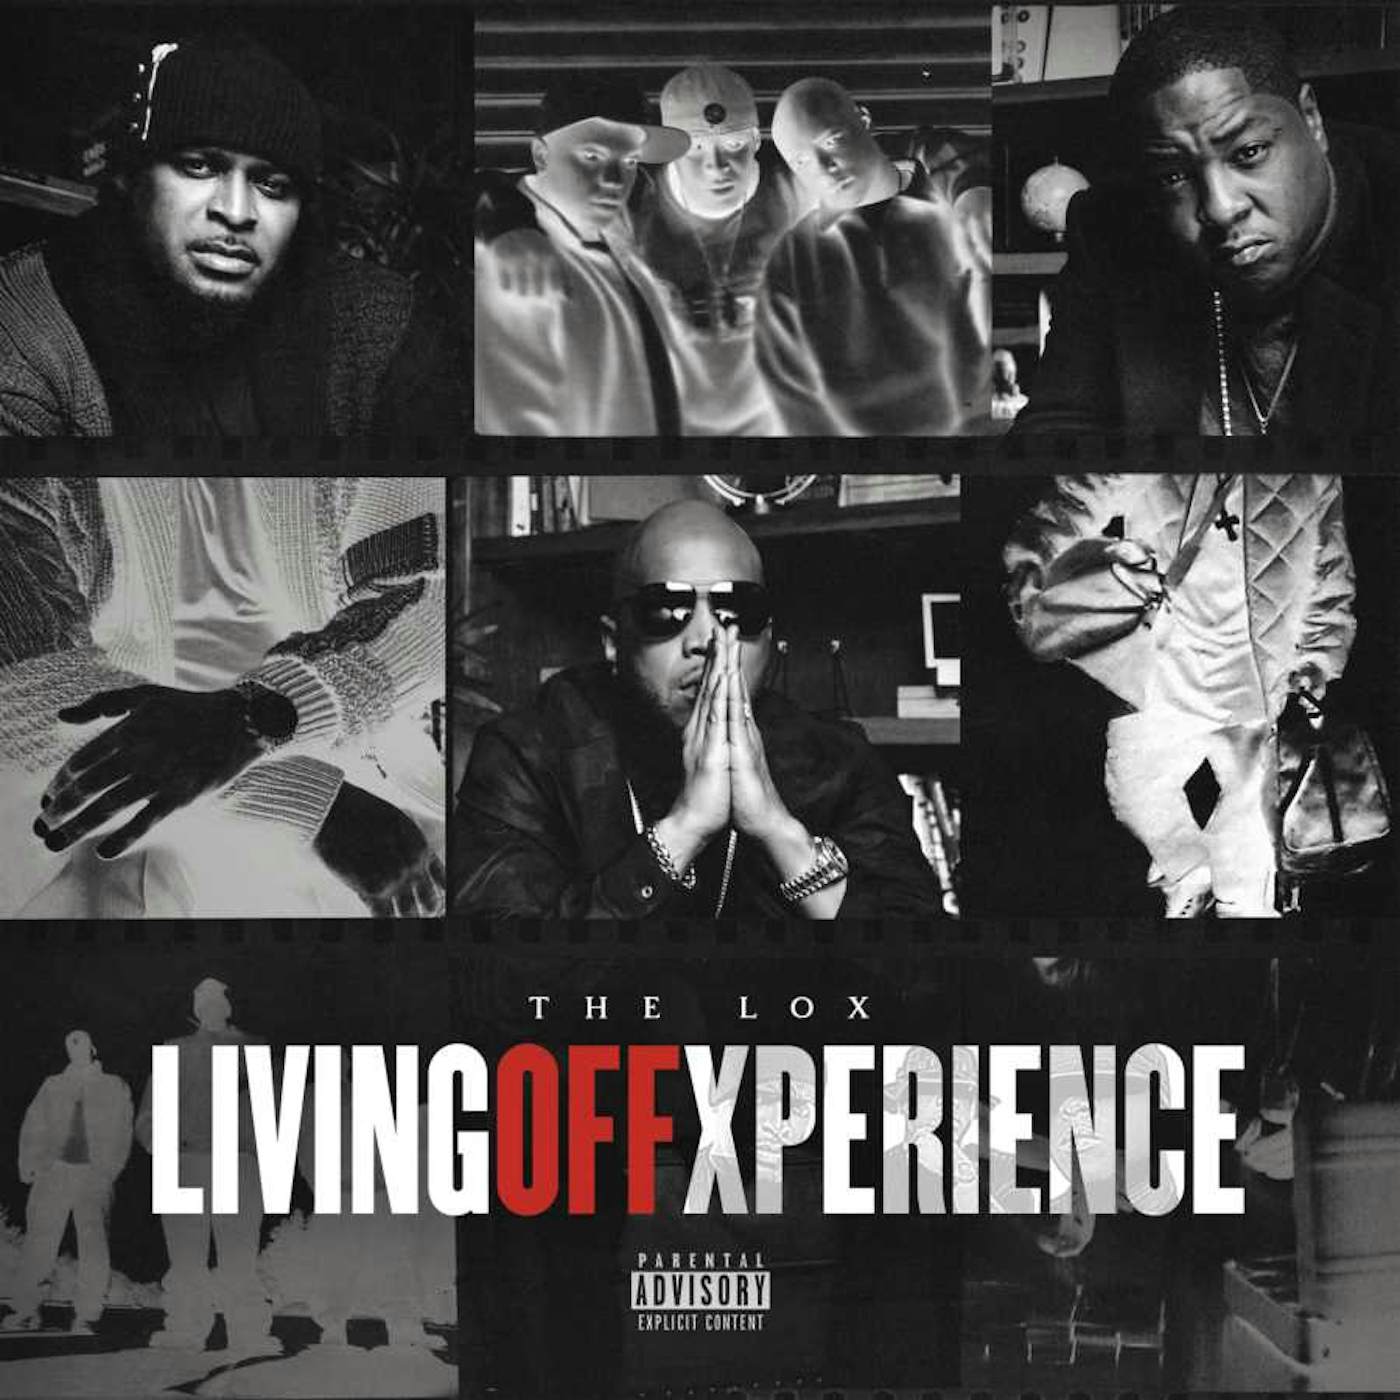 The LOX LIVING OFF XPERIENCE CD